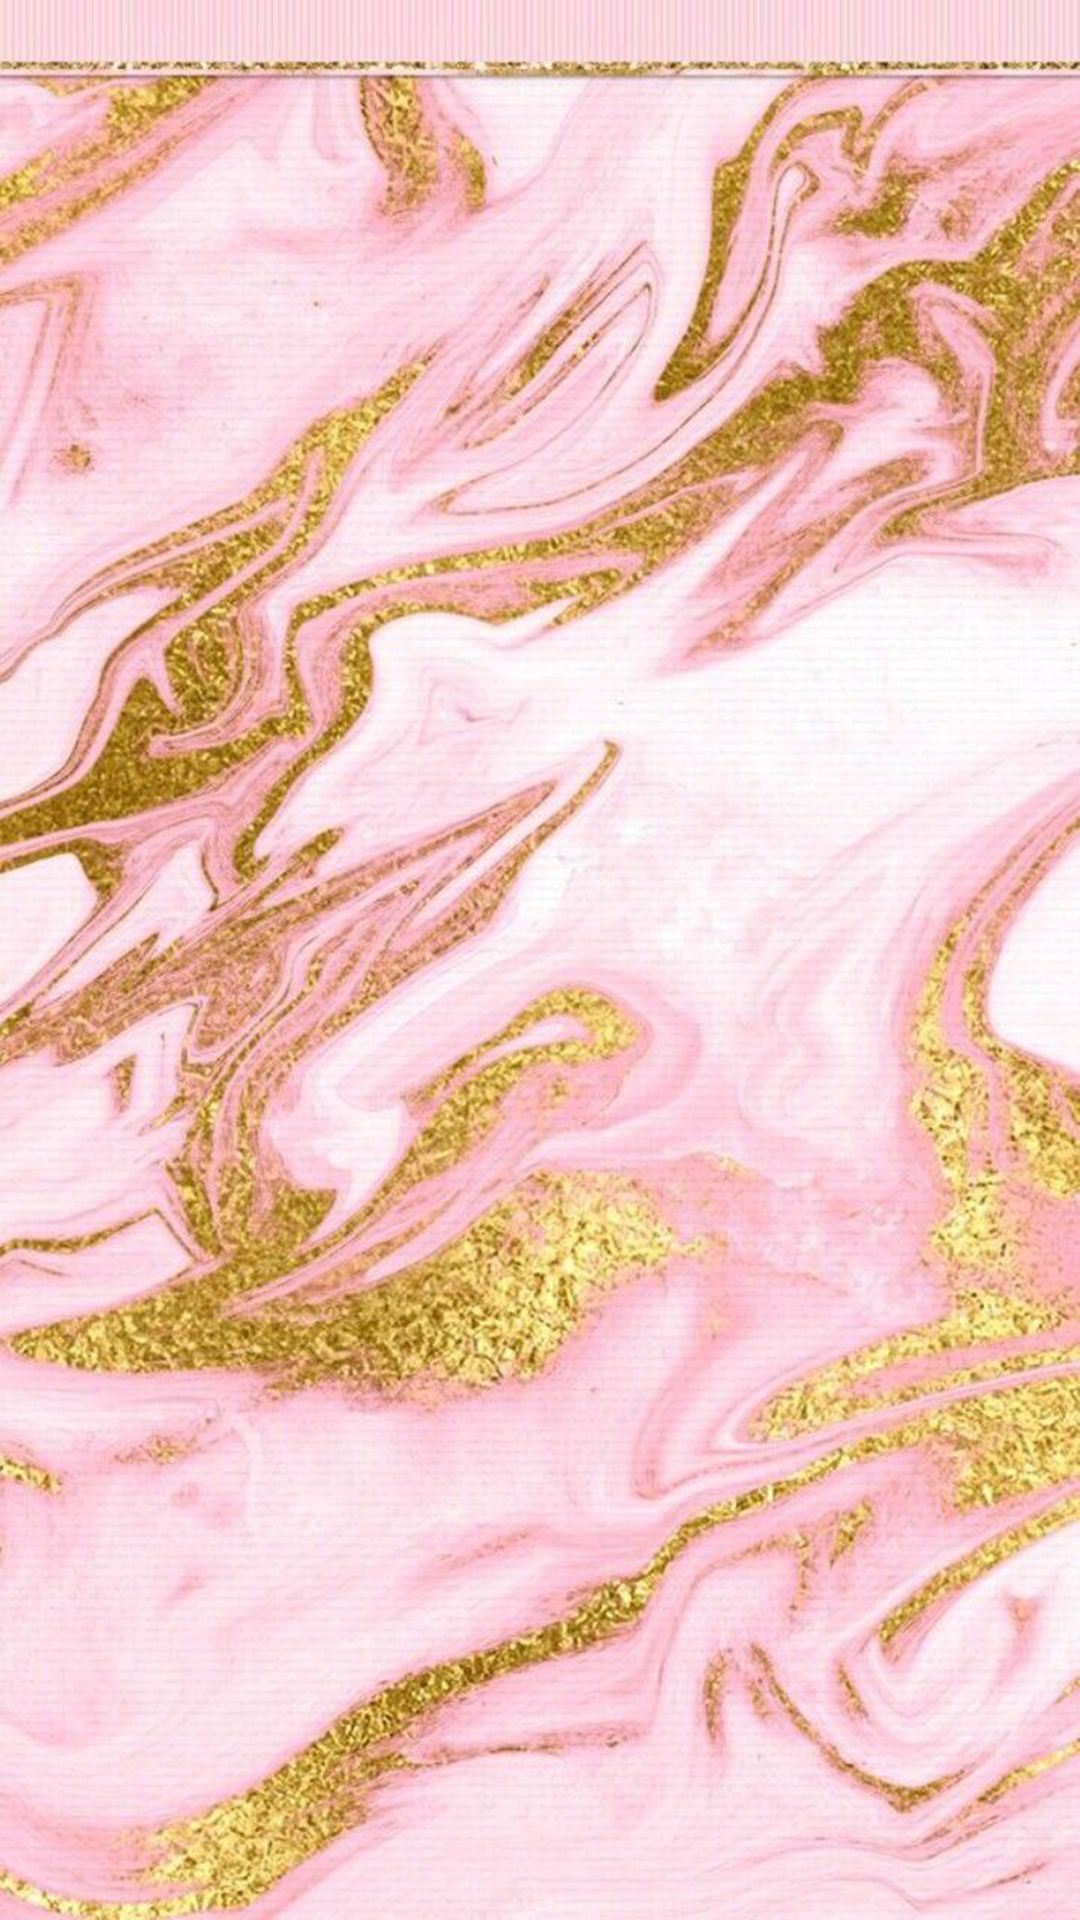 IPhone wallpaper with beautiful marbled design and gold accents. - Gold, rose gold